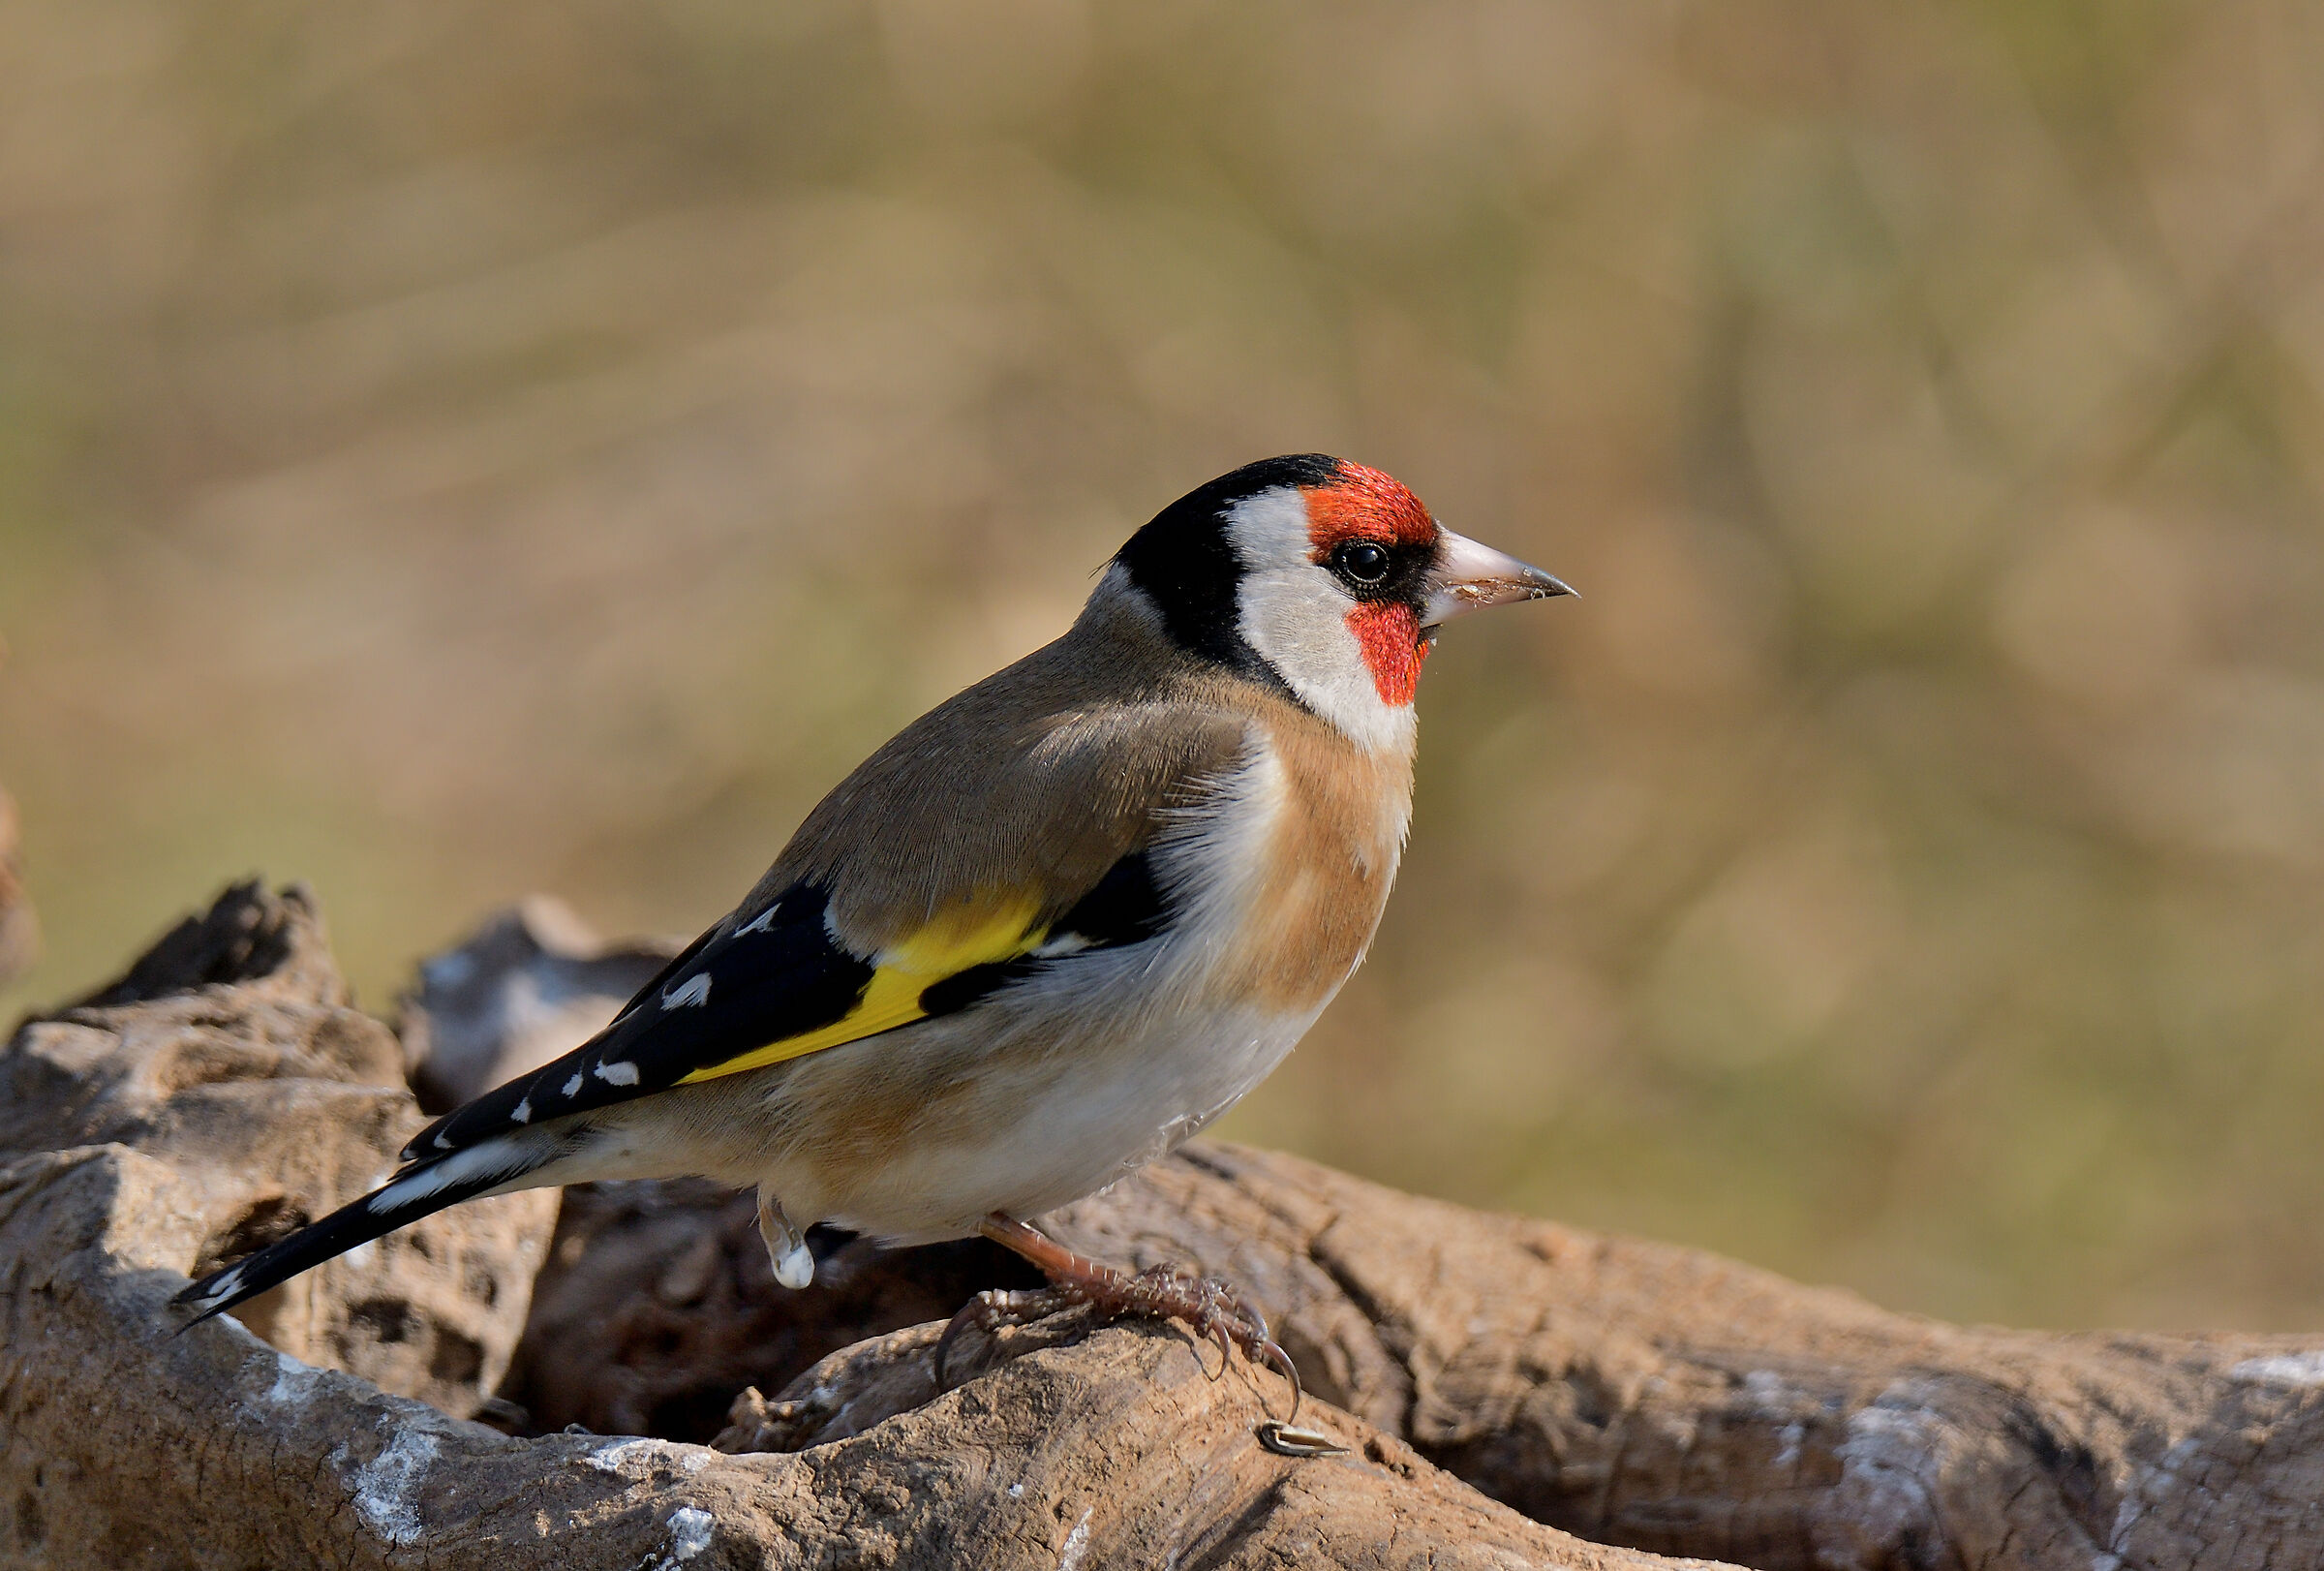 the beautiful colors of the goldfinch...